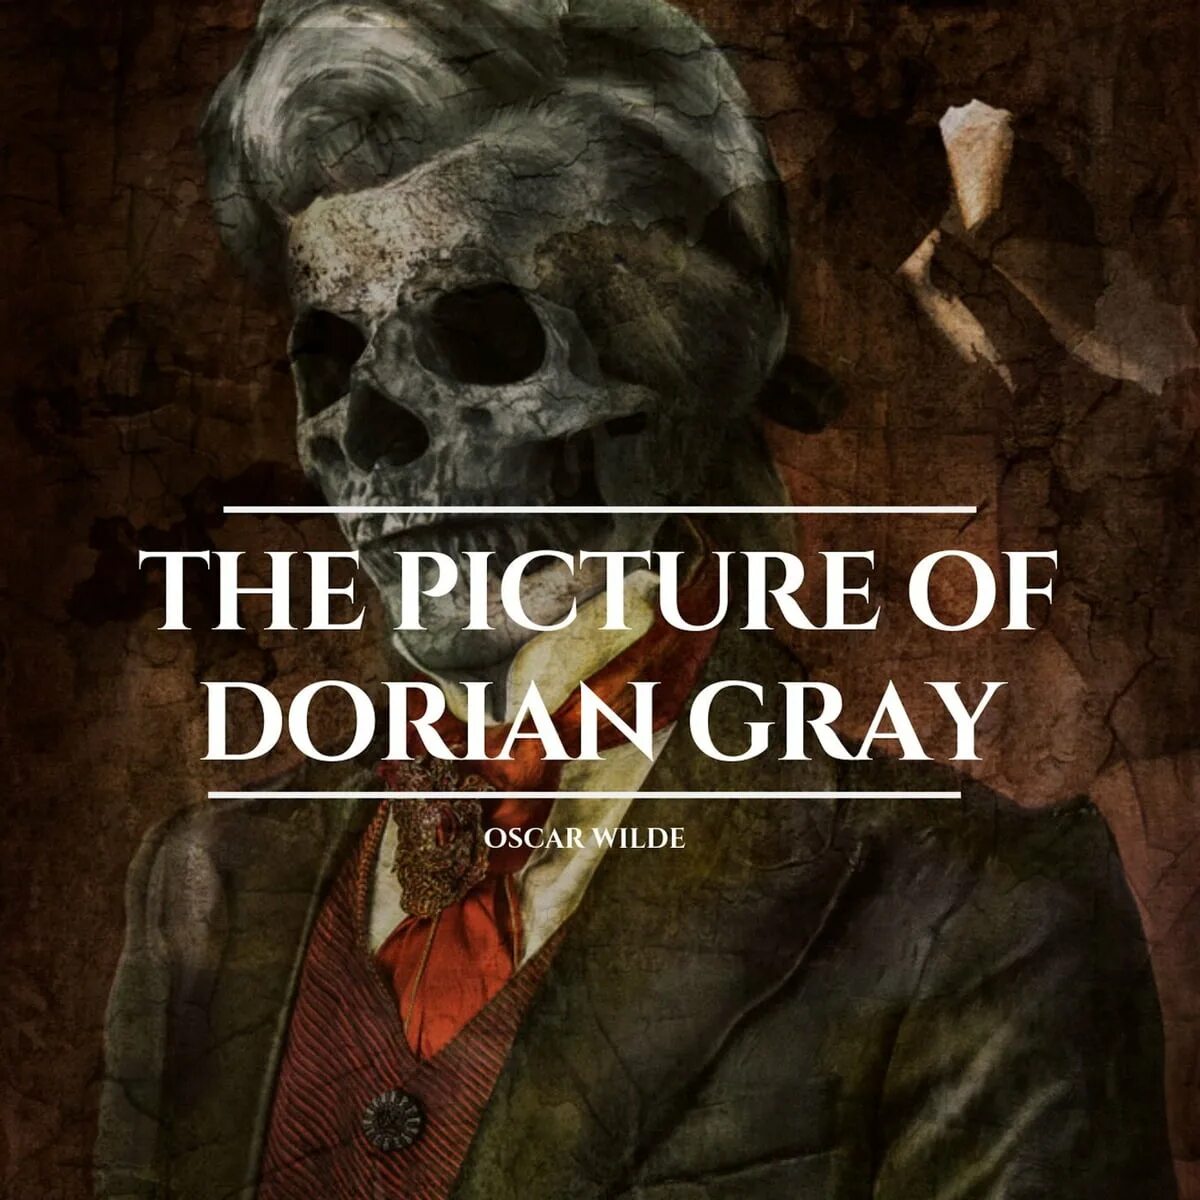 Аудиокнига оскар. The picture of Dorian Gray 2009. The picture of Dorian Gray. The picture of Dorian Gray by Oscar Wilde. Oscar Wilde Dorian Gray.